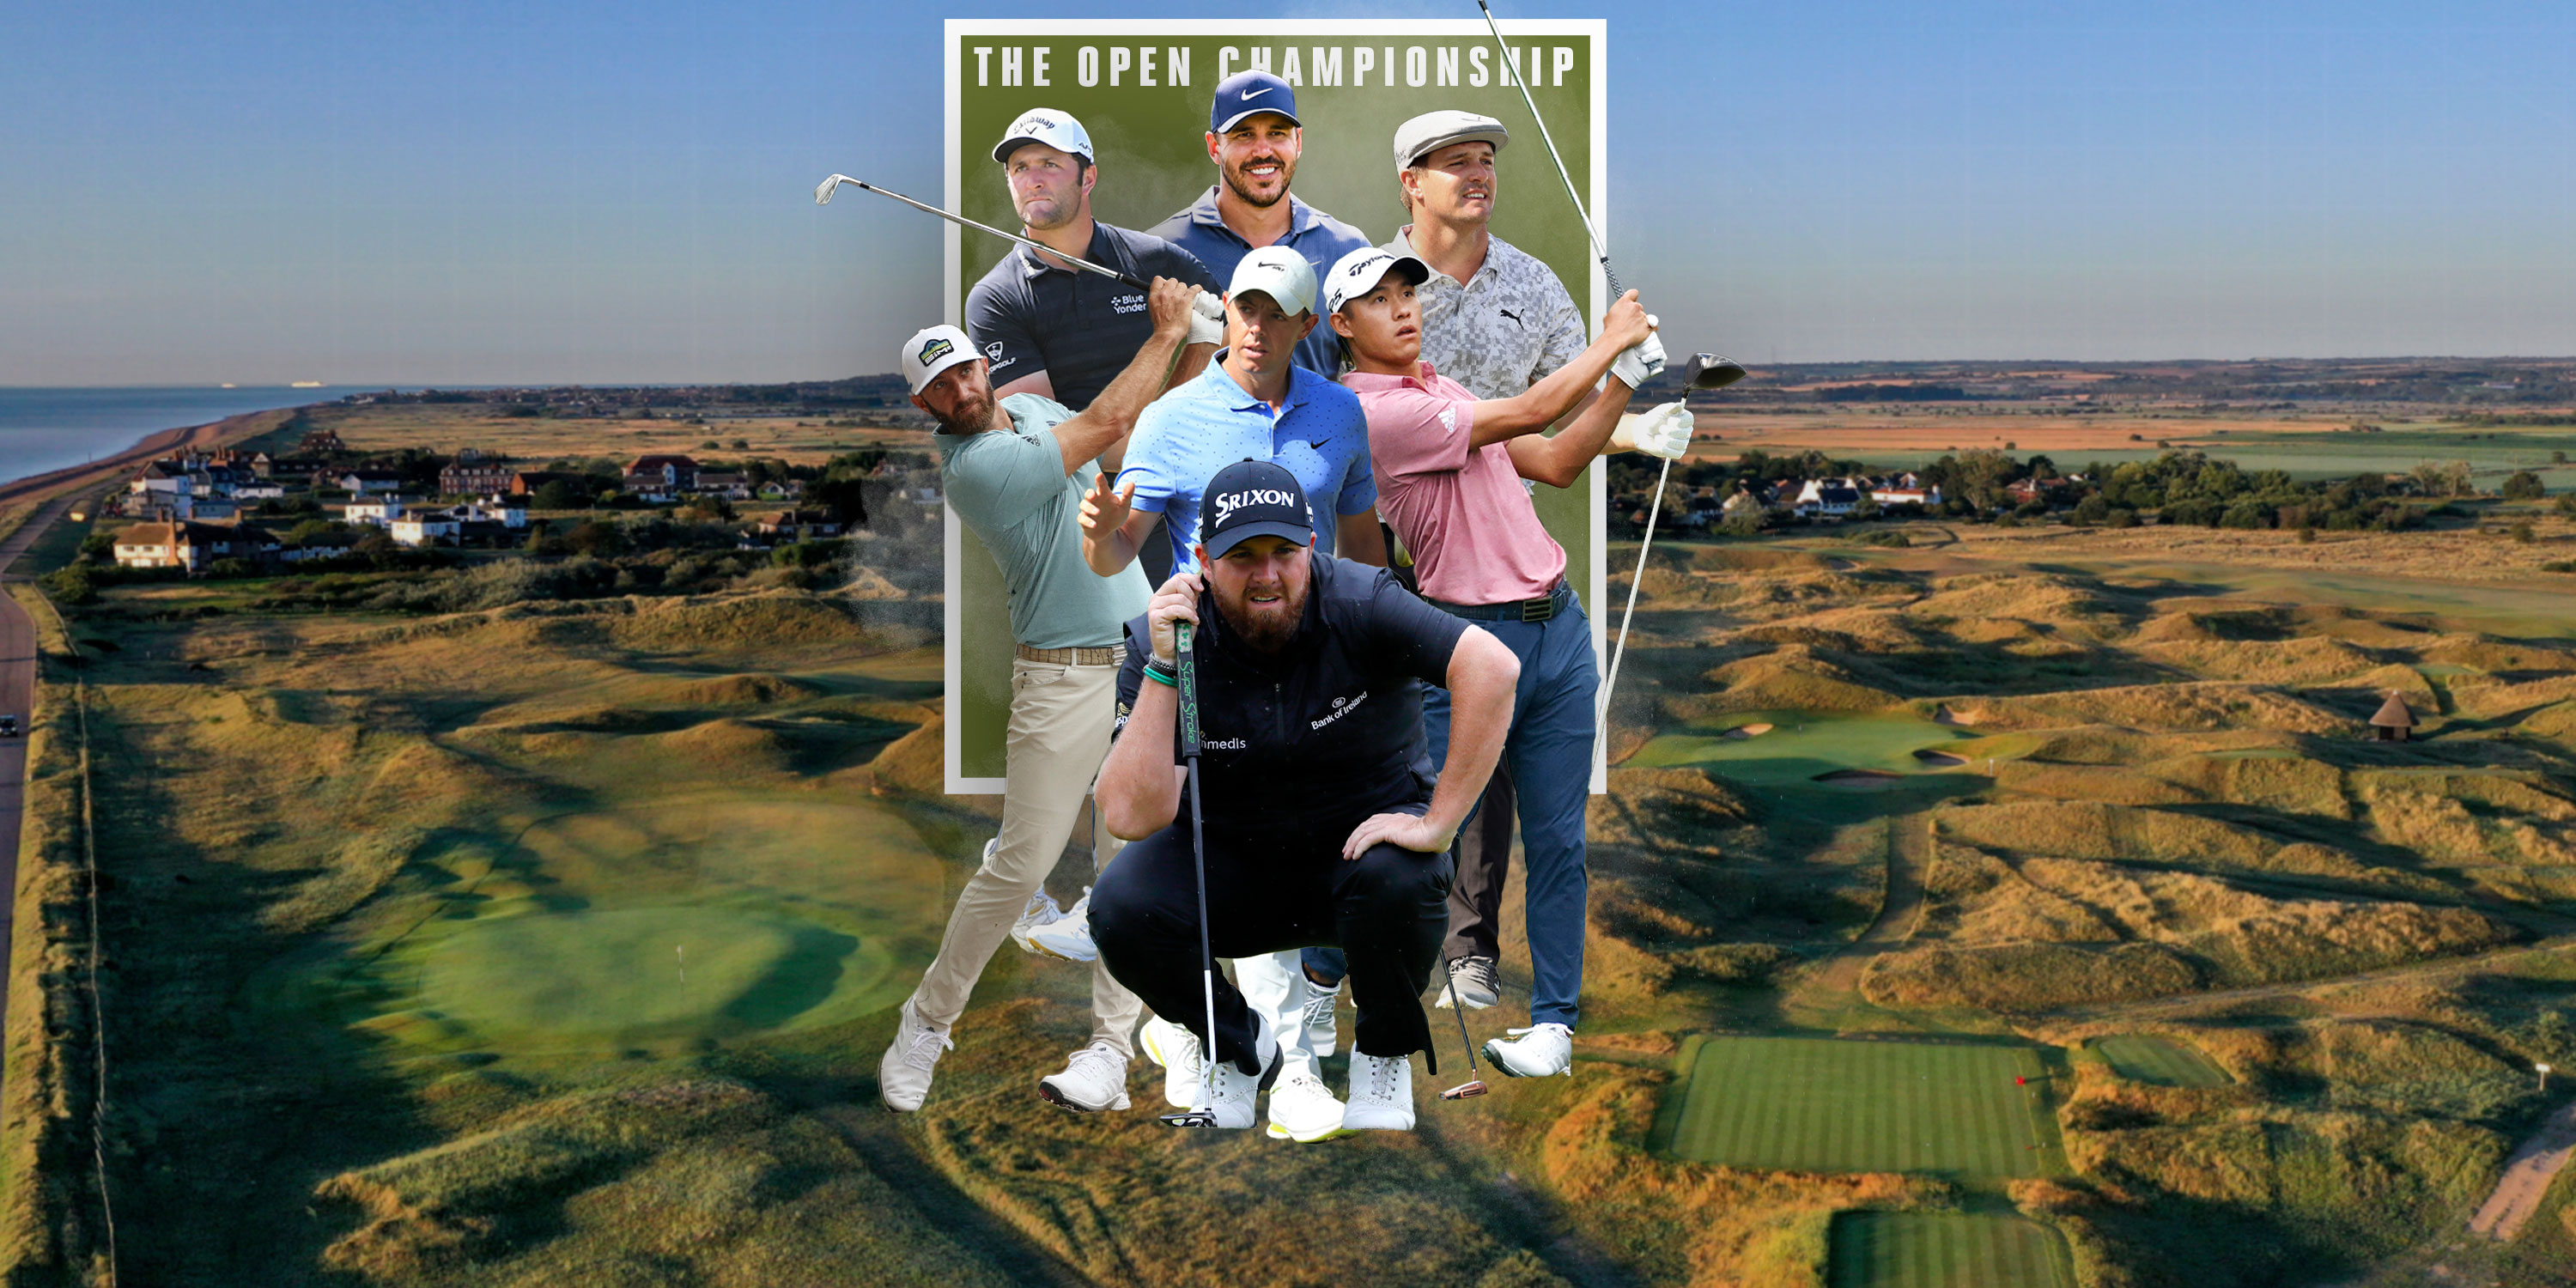 The open